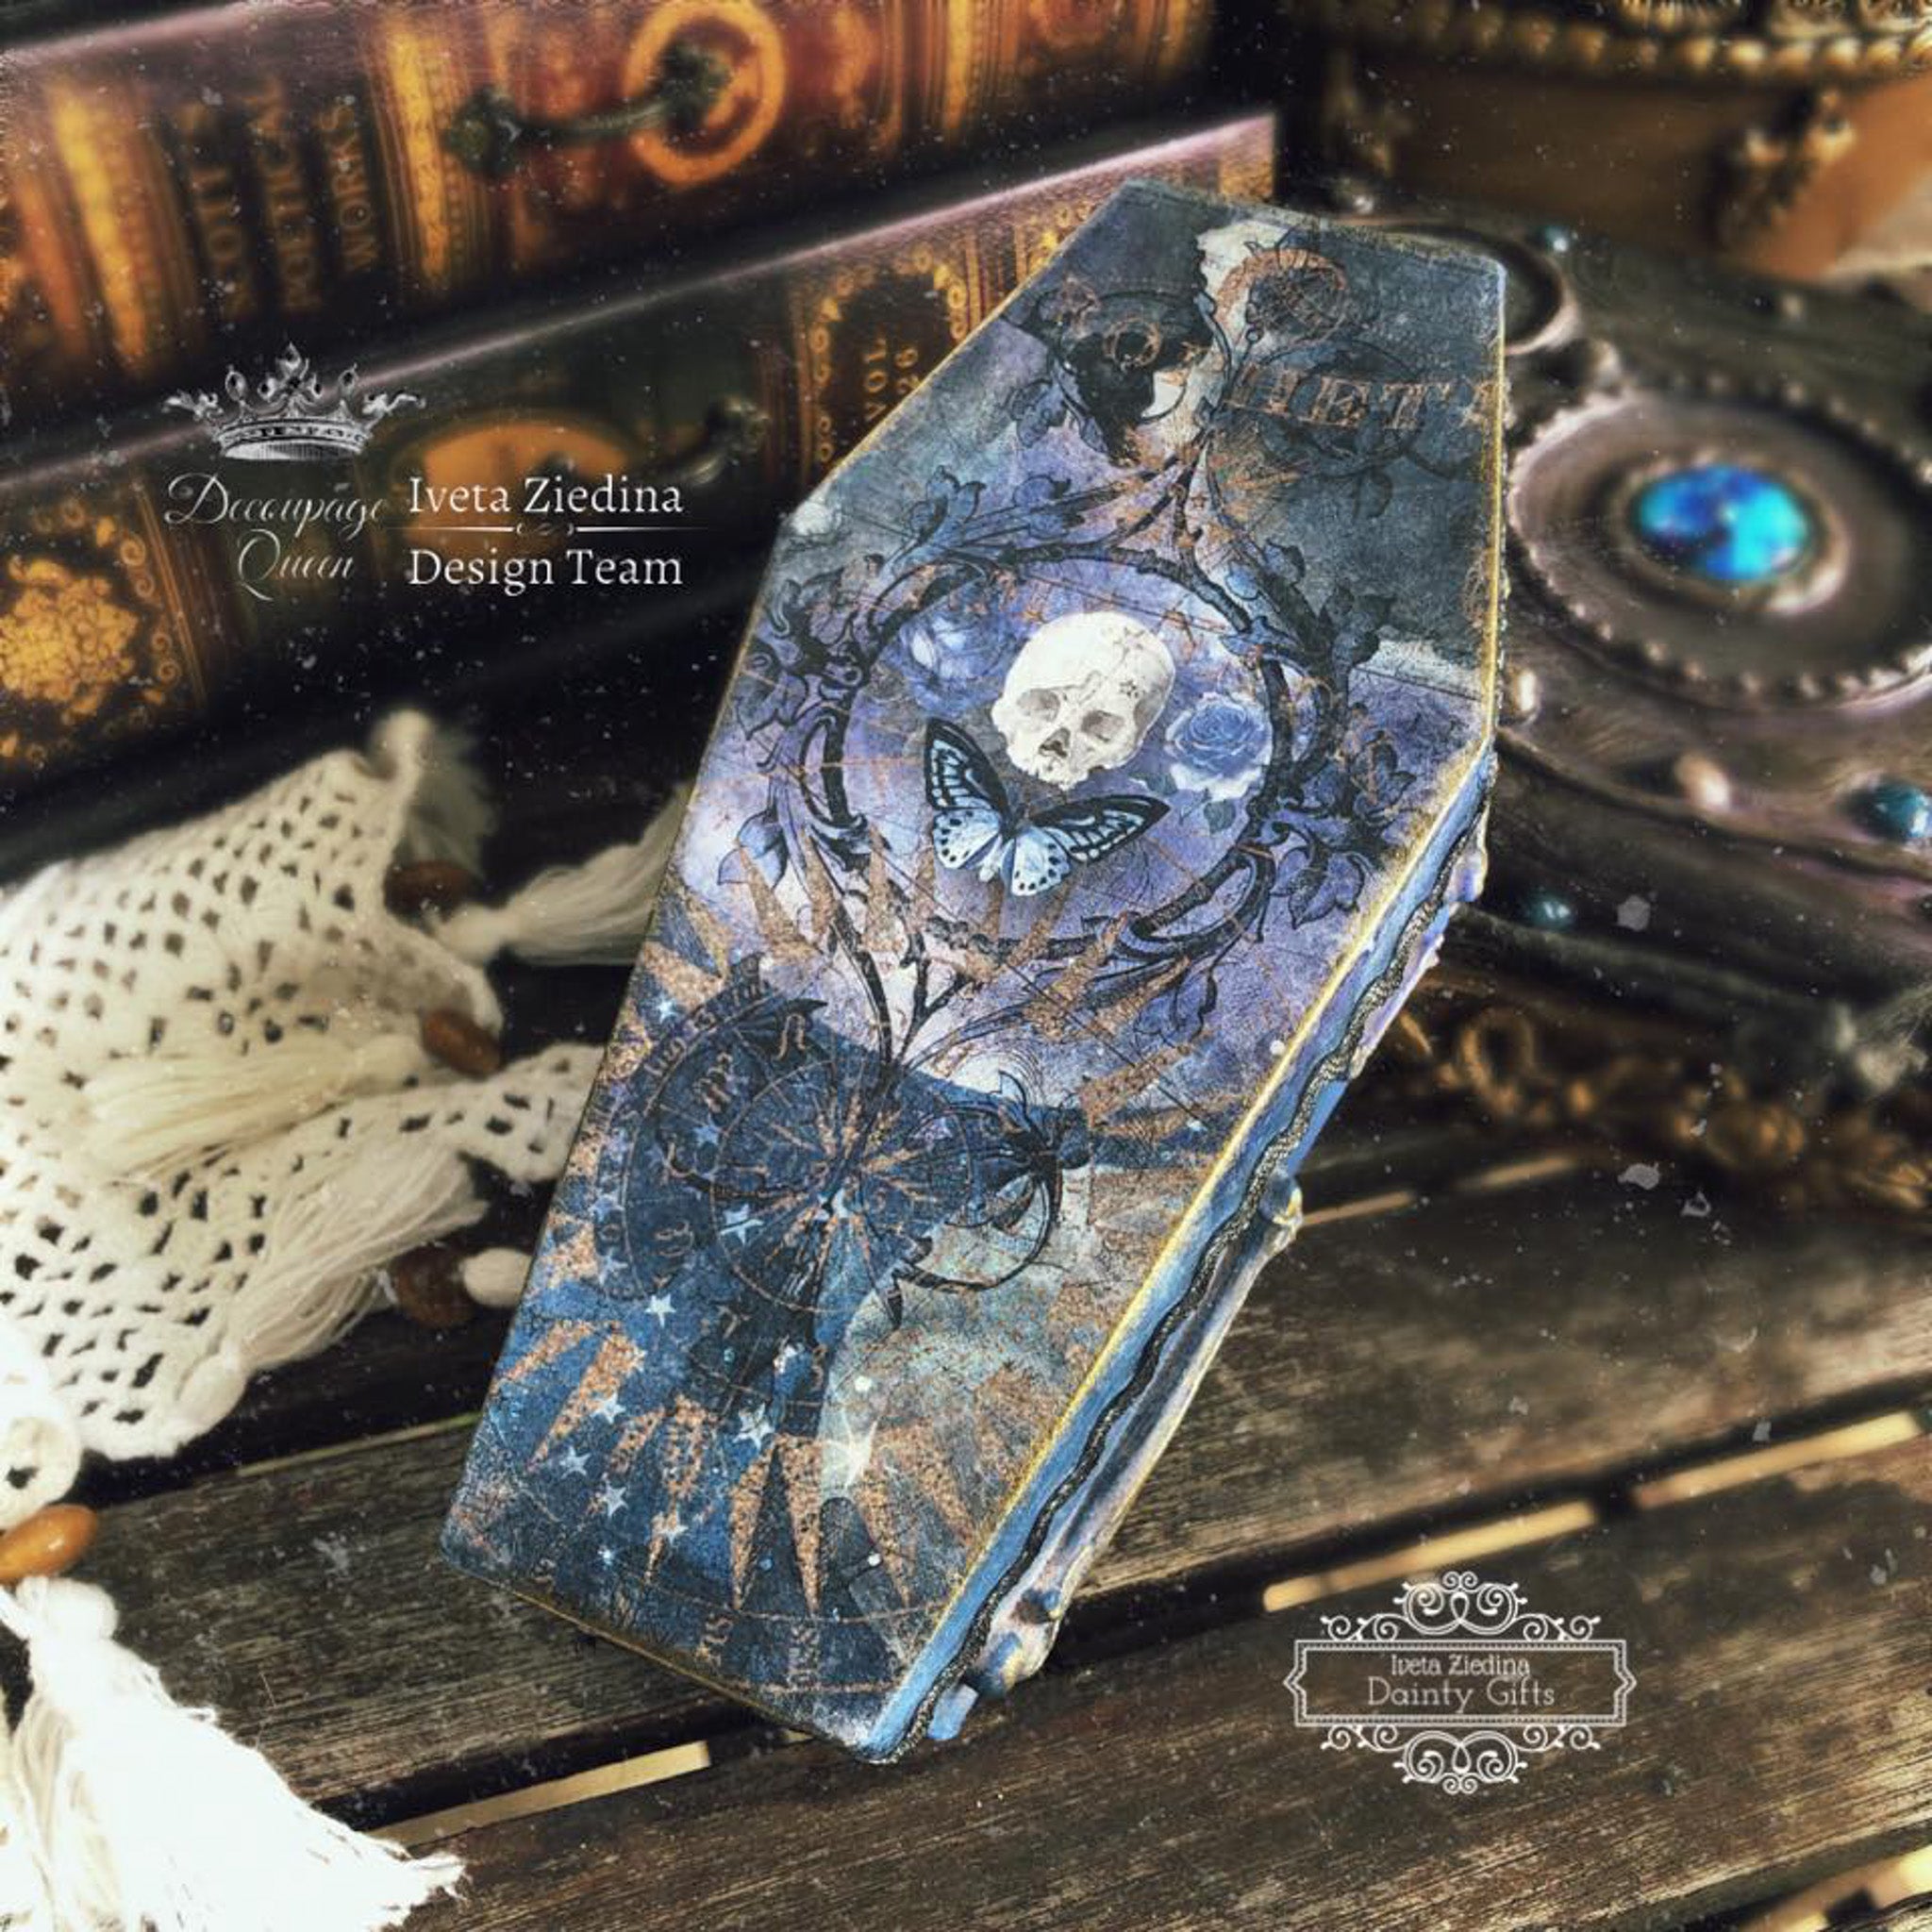 A coffin shaped decoration with the Memento Mori decoupage paper on top. A white Decoupage Queen and Iveta Ziedina Design Team logo on the top left.